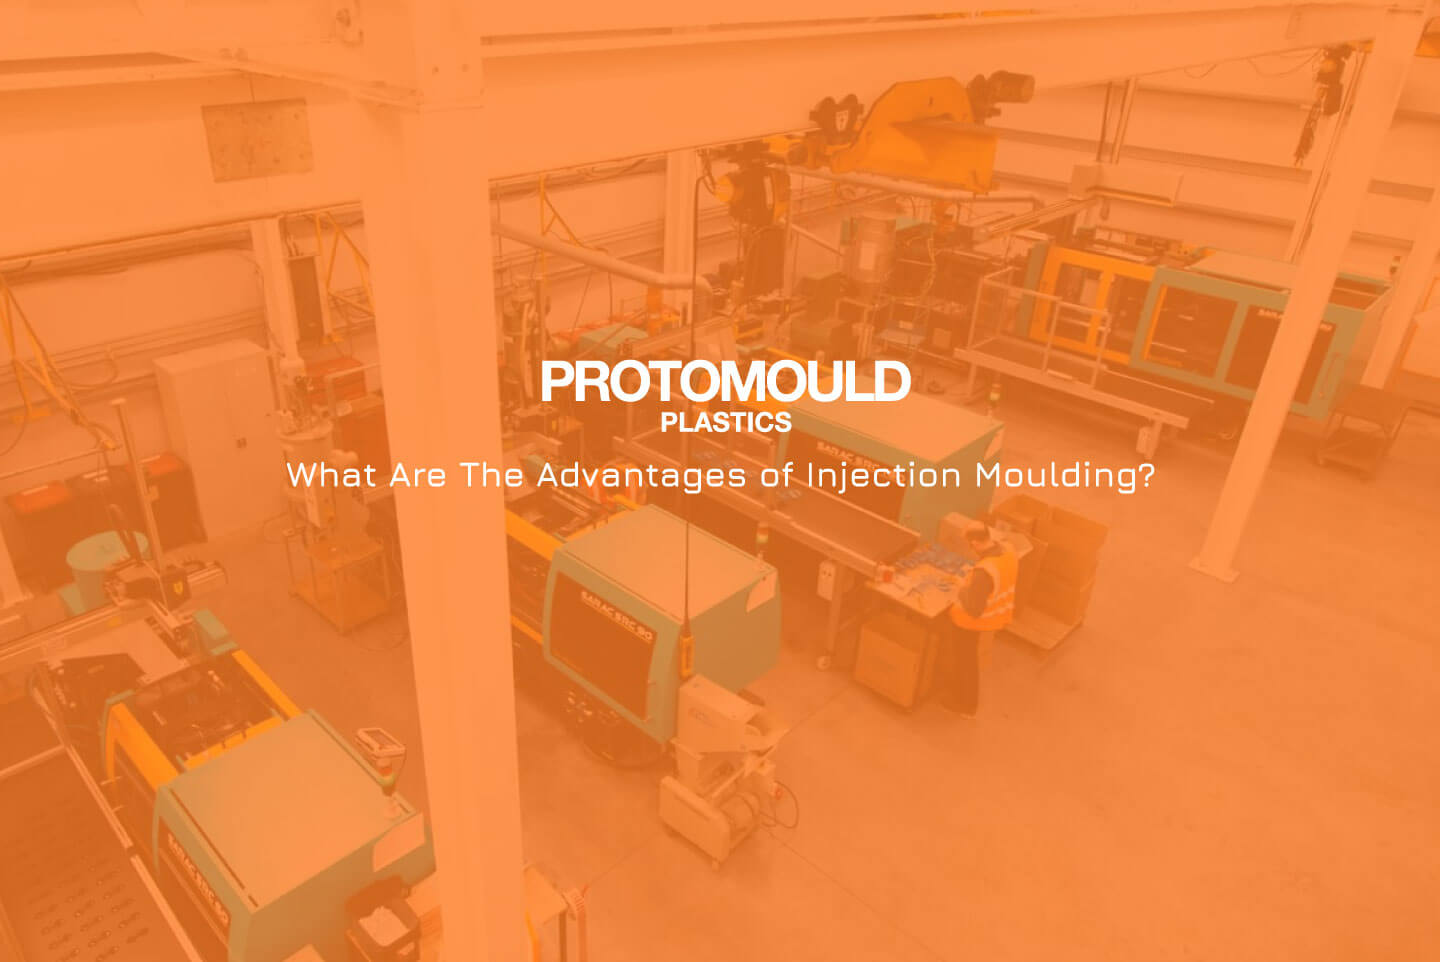 What Are The Advantages of Injection Moulding?